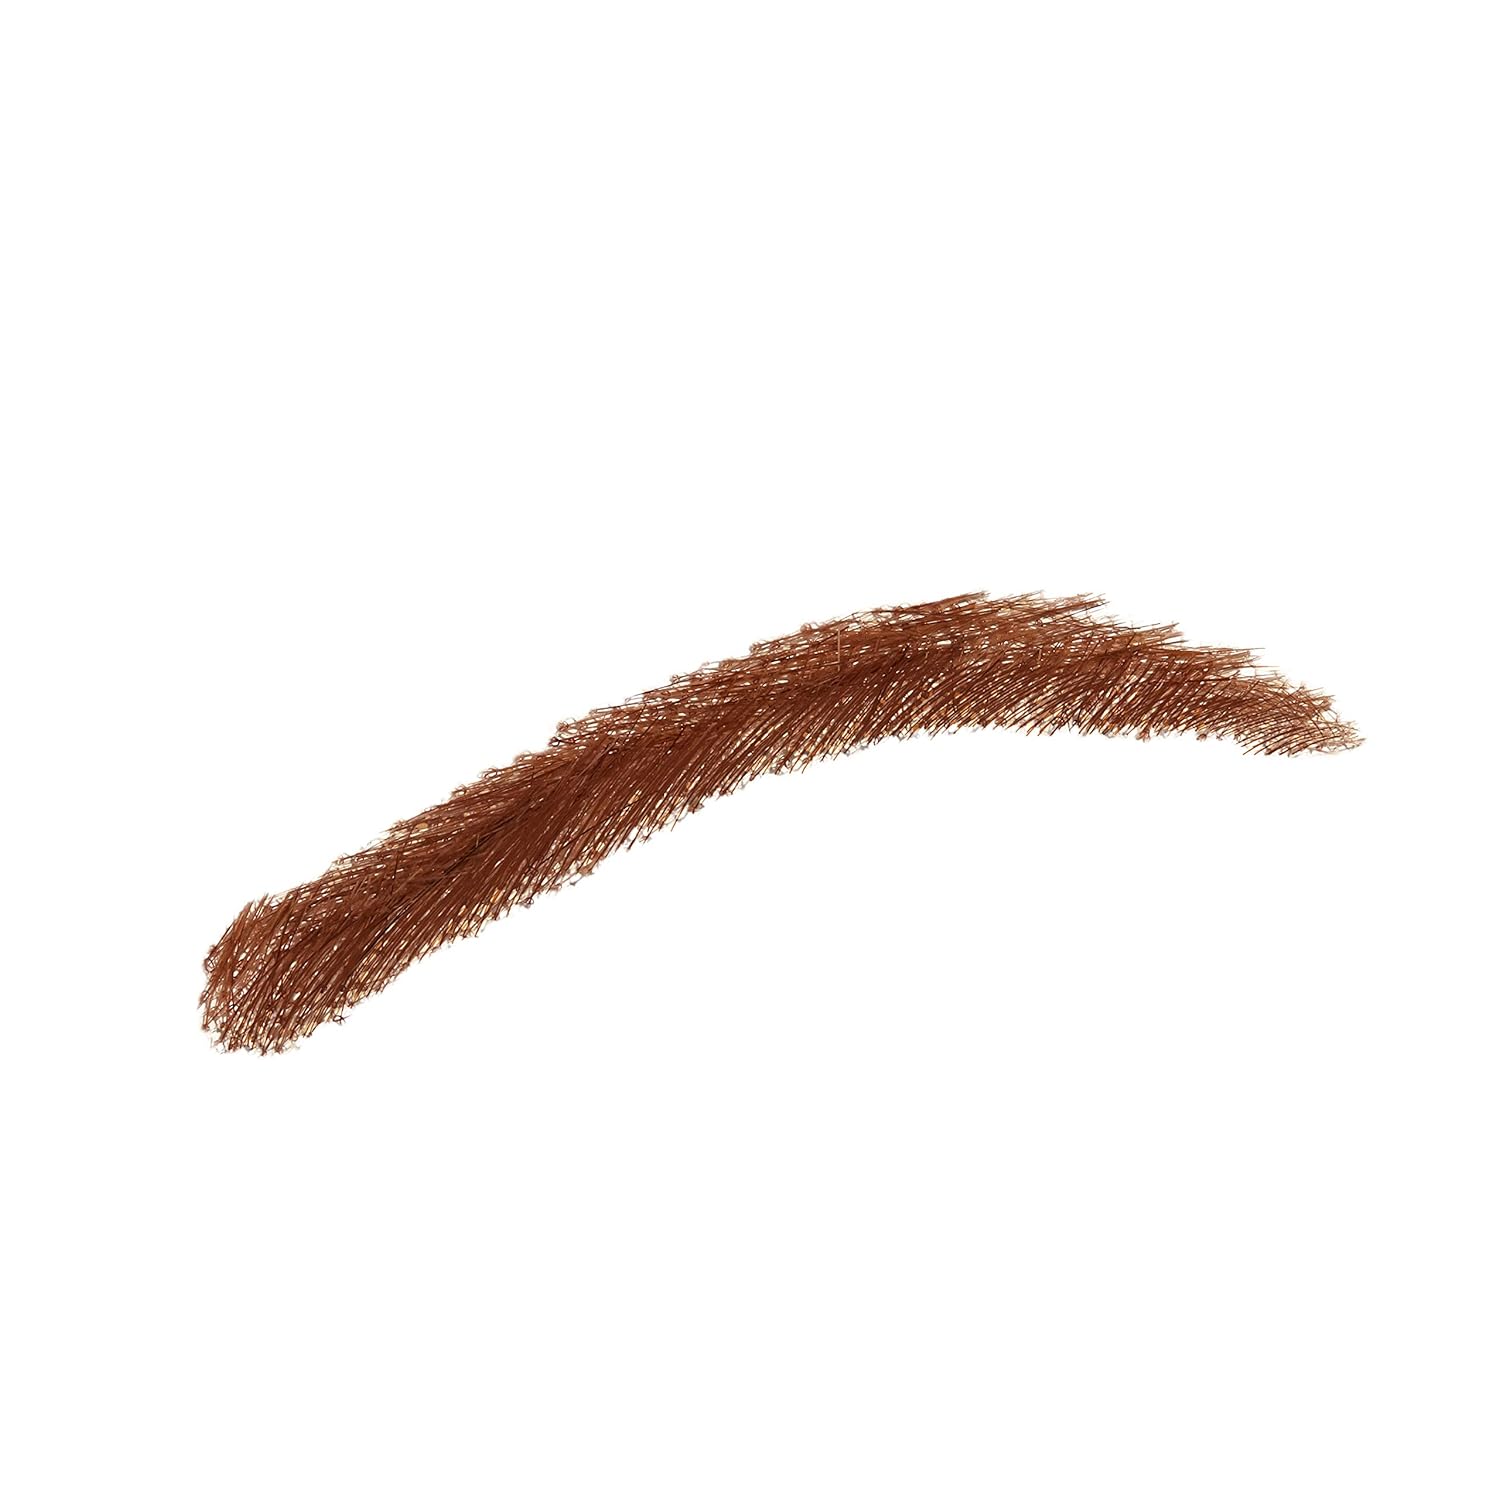 Volition Beauty Mission Brows, Light Brown - Eyebrow Wigs Made of Responsibly-Sourced Human Hair - Long-Lasting, Realistic False Eyebrow Alternative with Easy Application